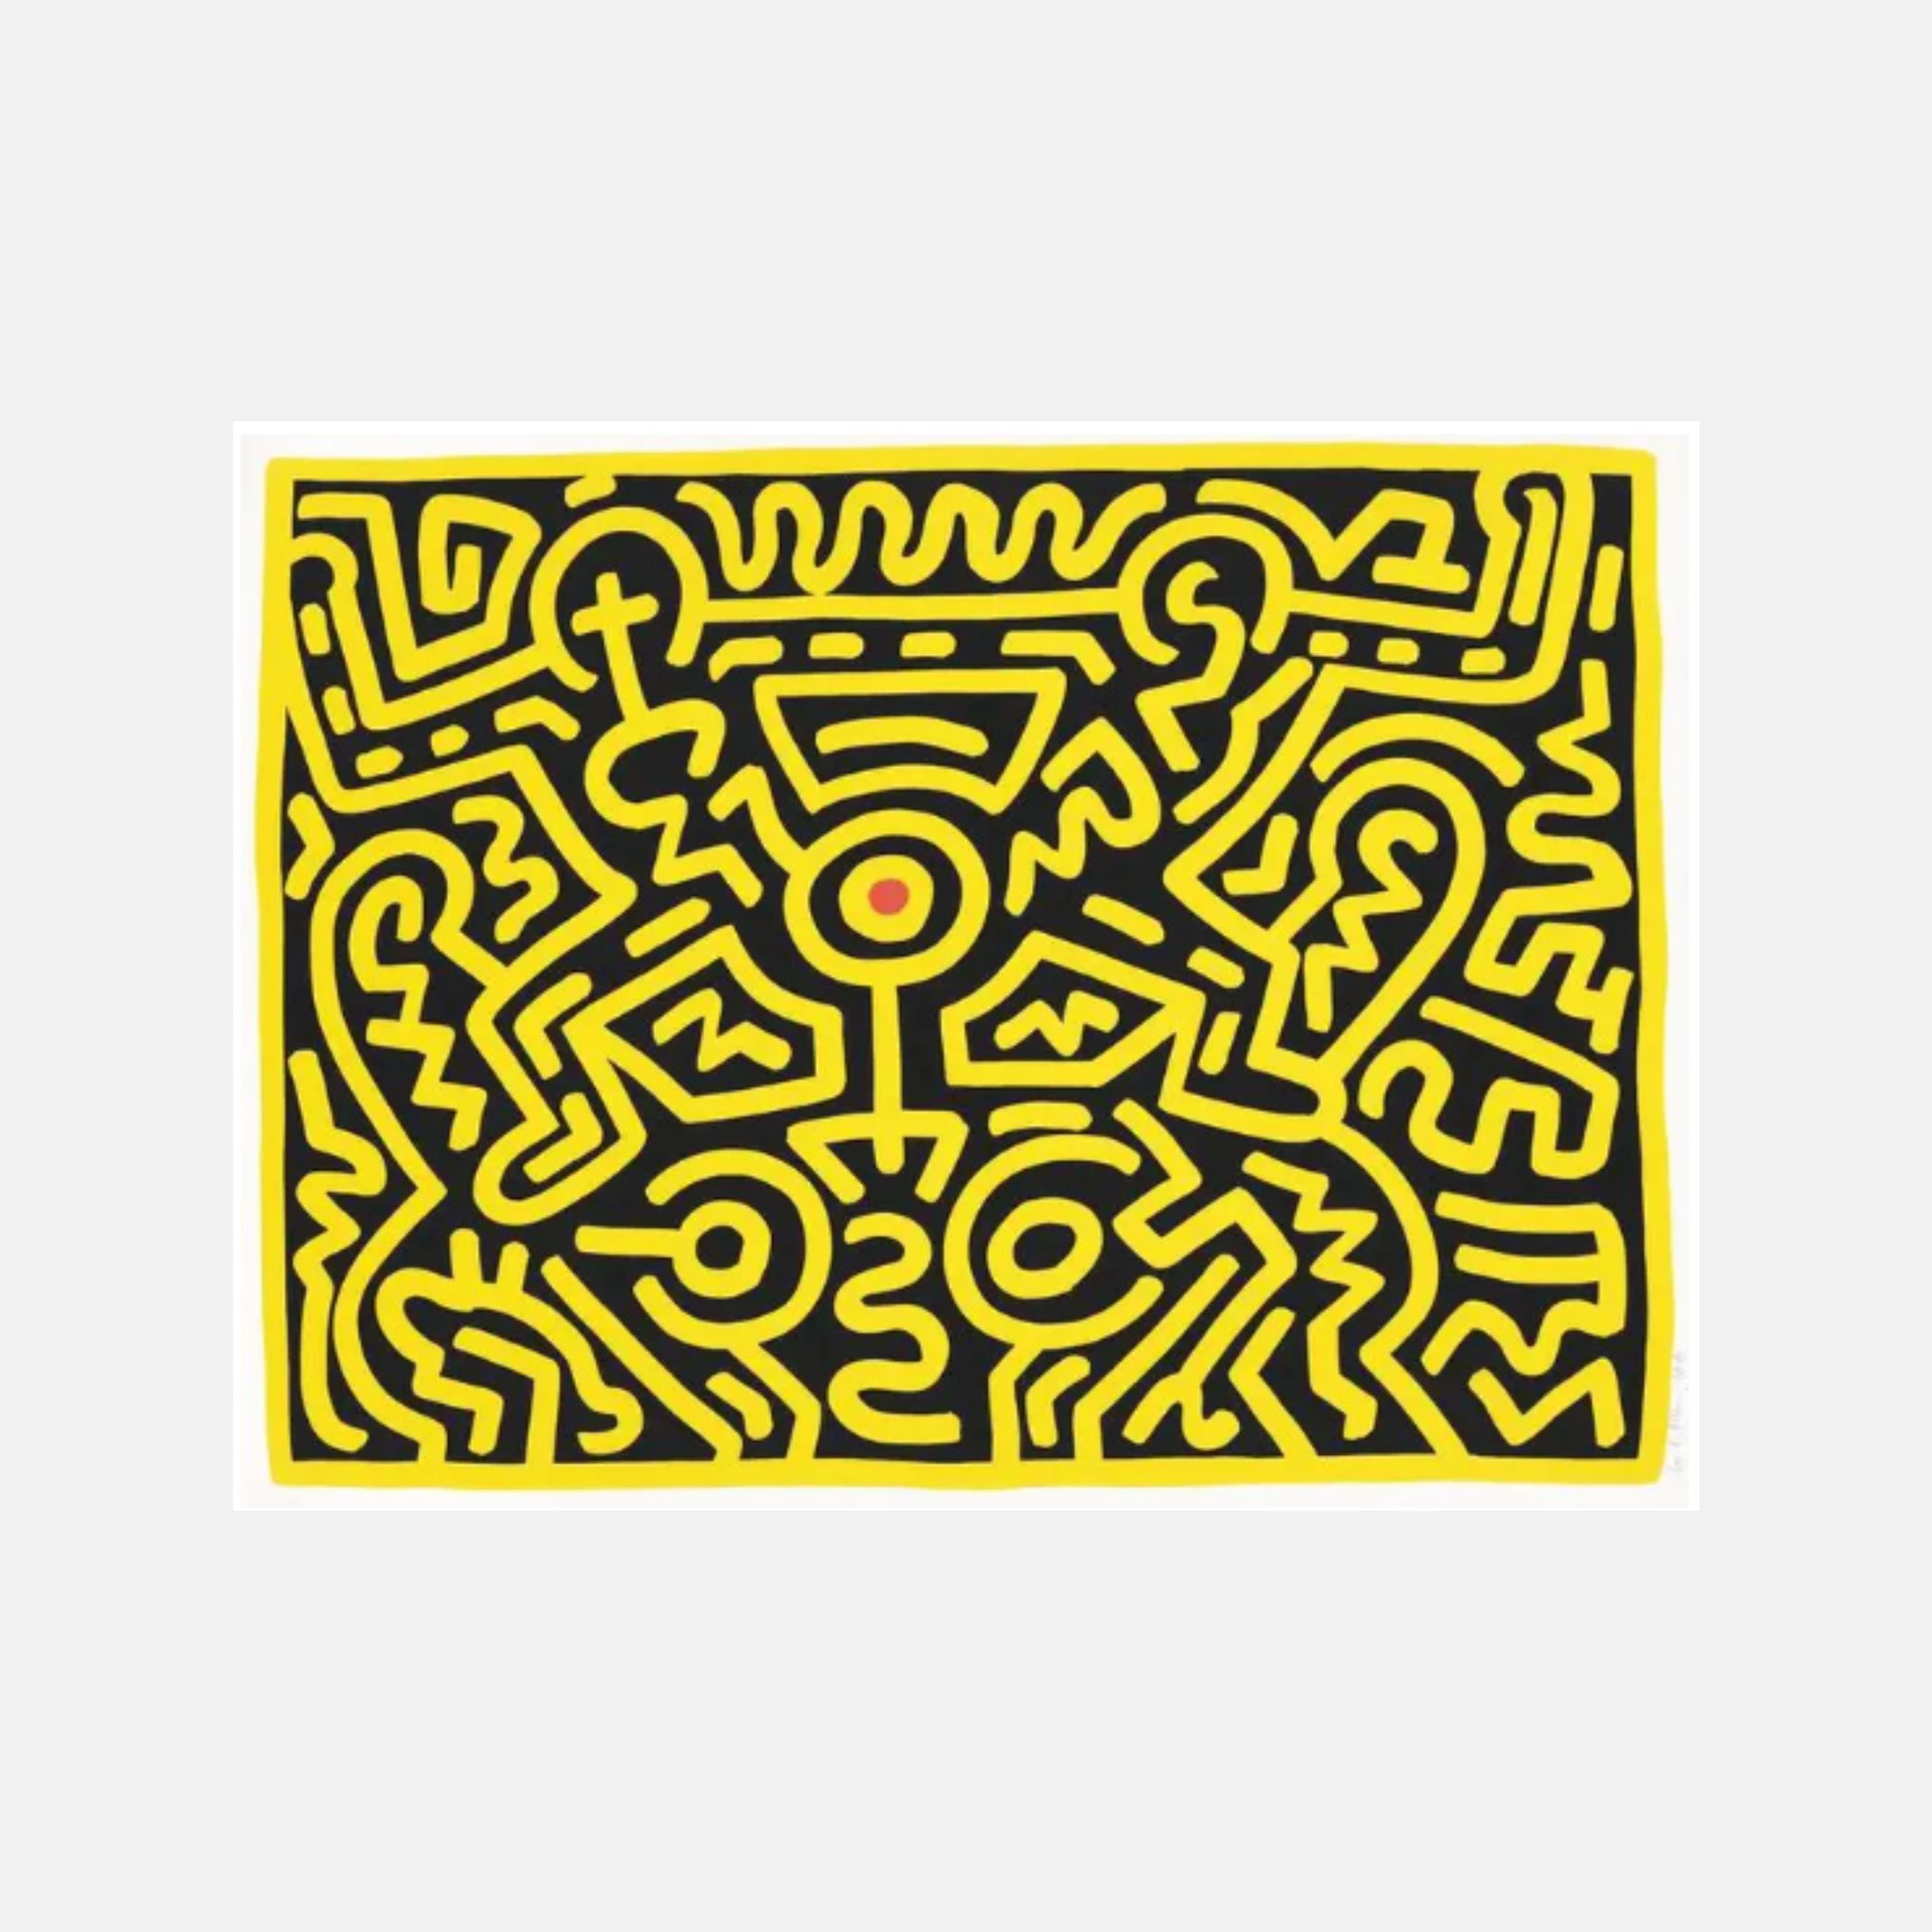 Keith Haring, Growing 3, 1988 For Sale | Lougher Contemporary 